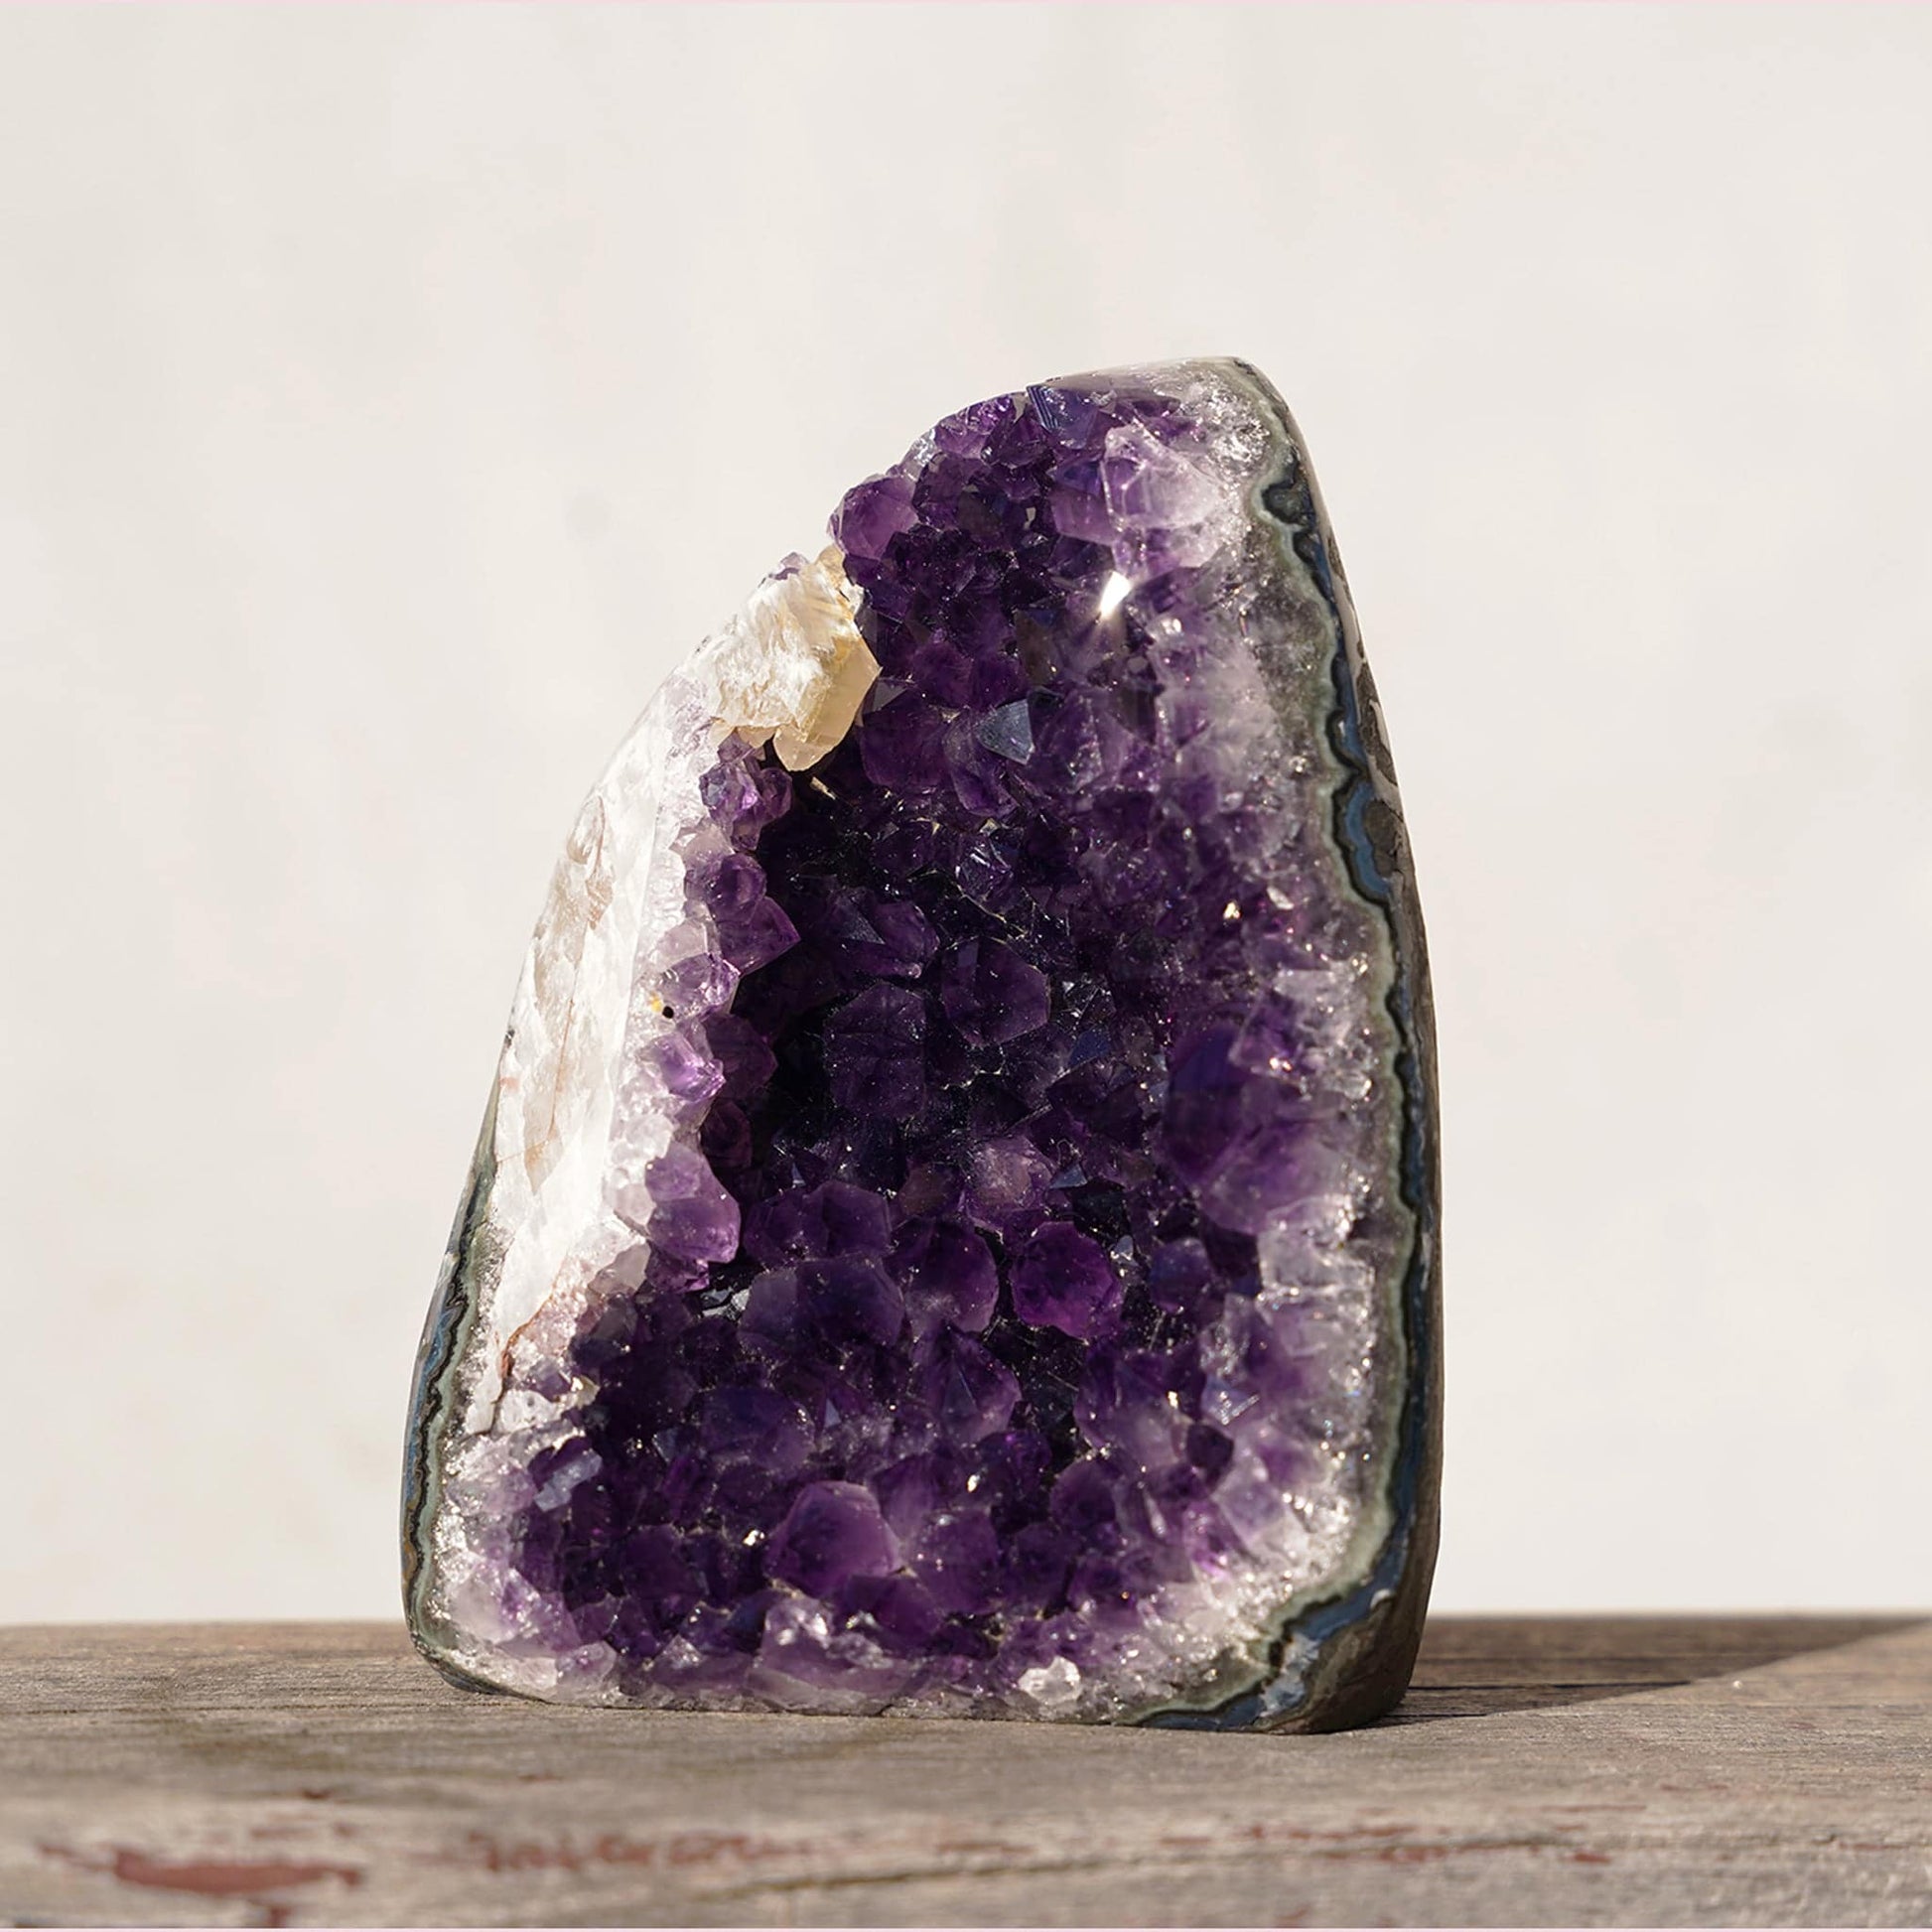 Amethyst geode cathedral-style with exquisite honey-color calcite formation. Opening in the basalt to explore green and bluish layers of agate and celadonite bands.